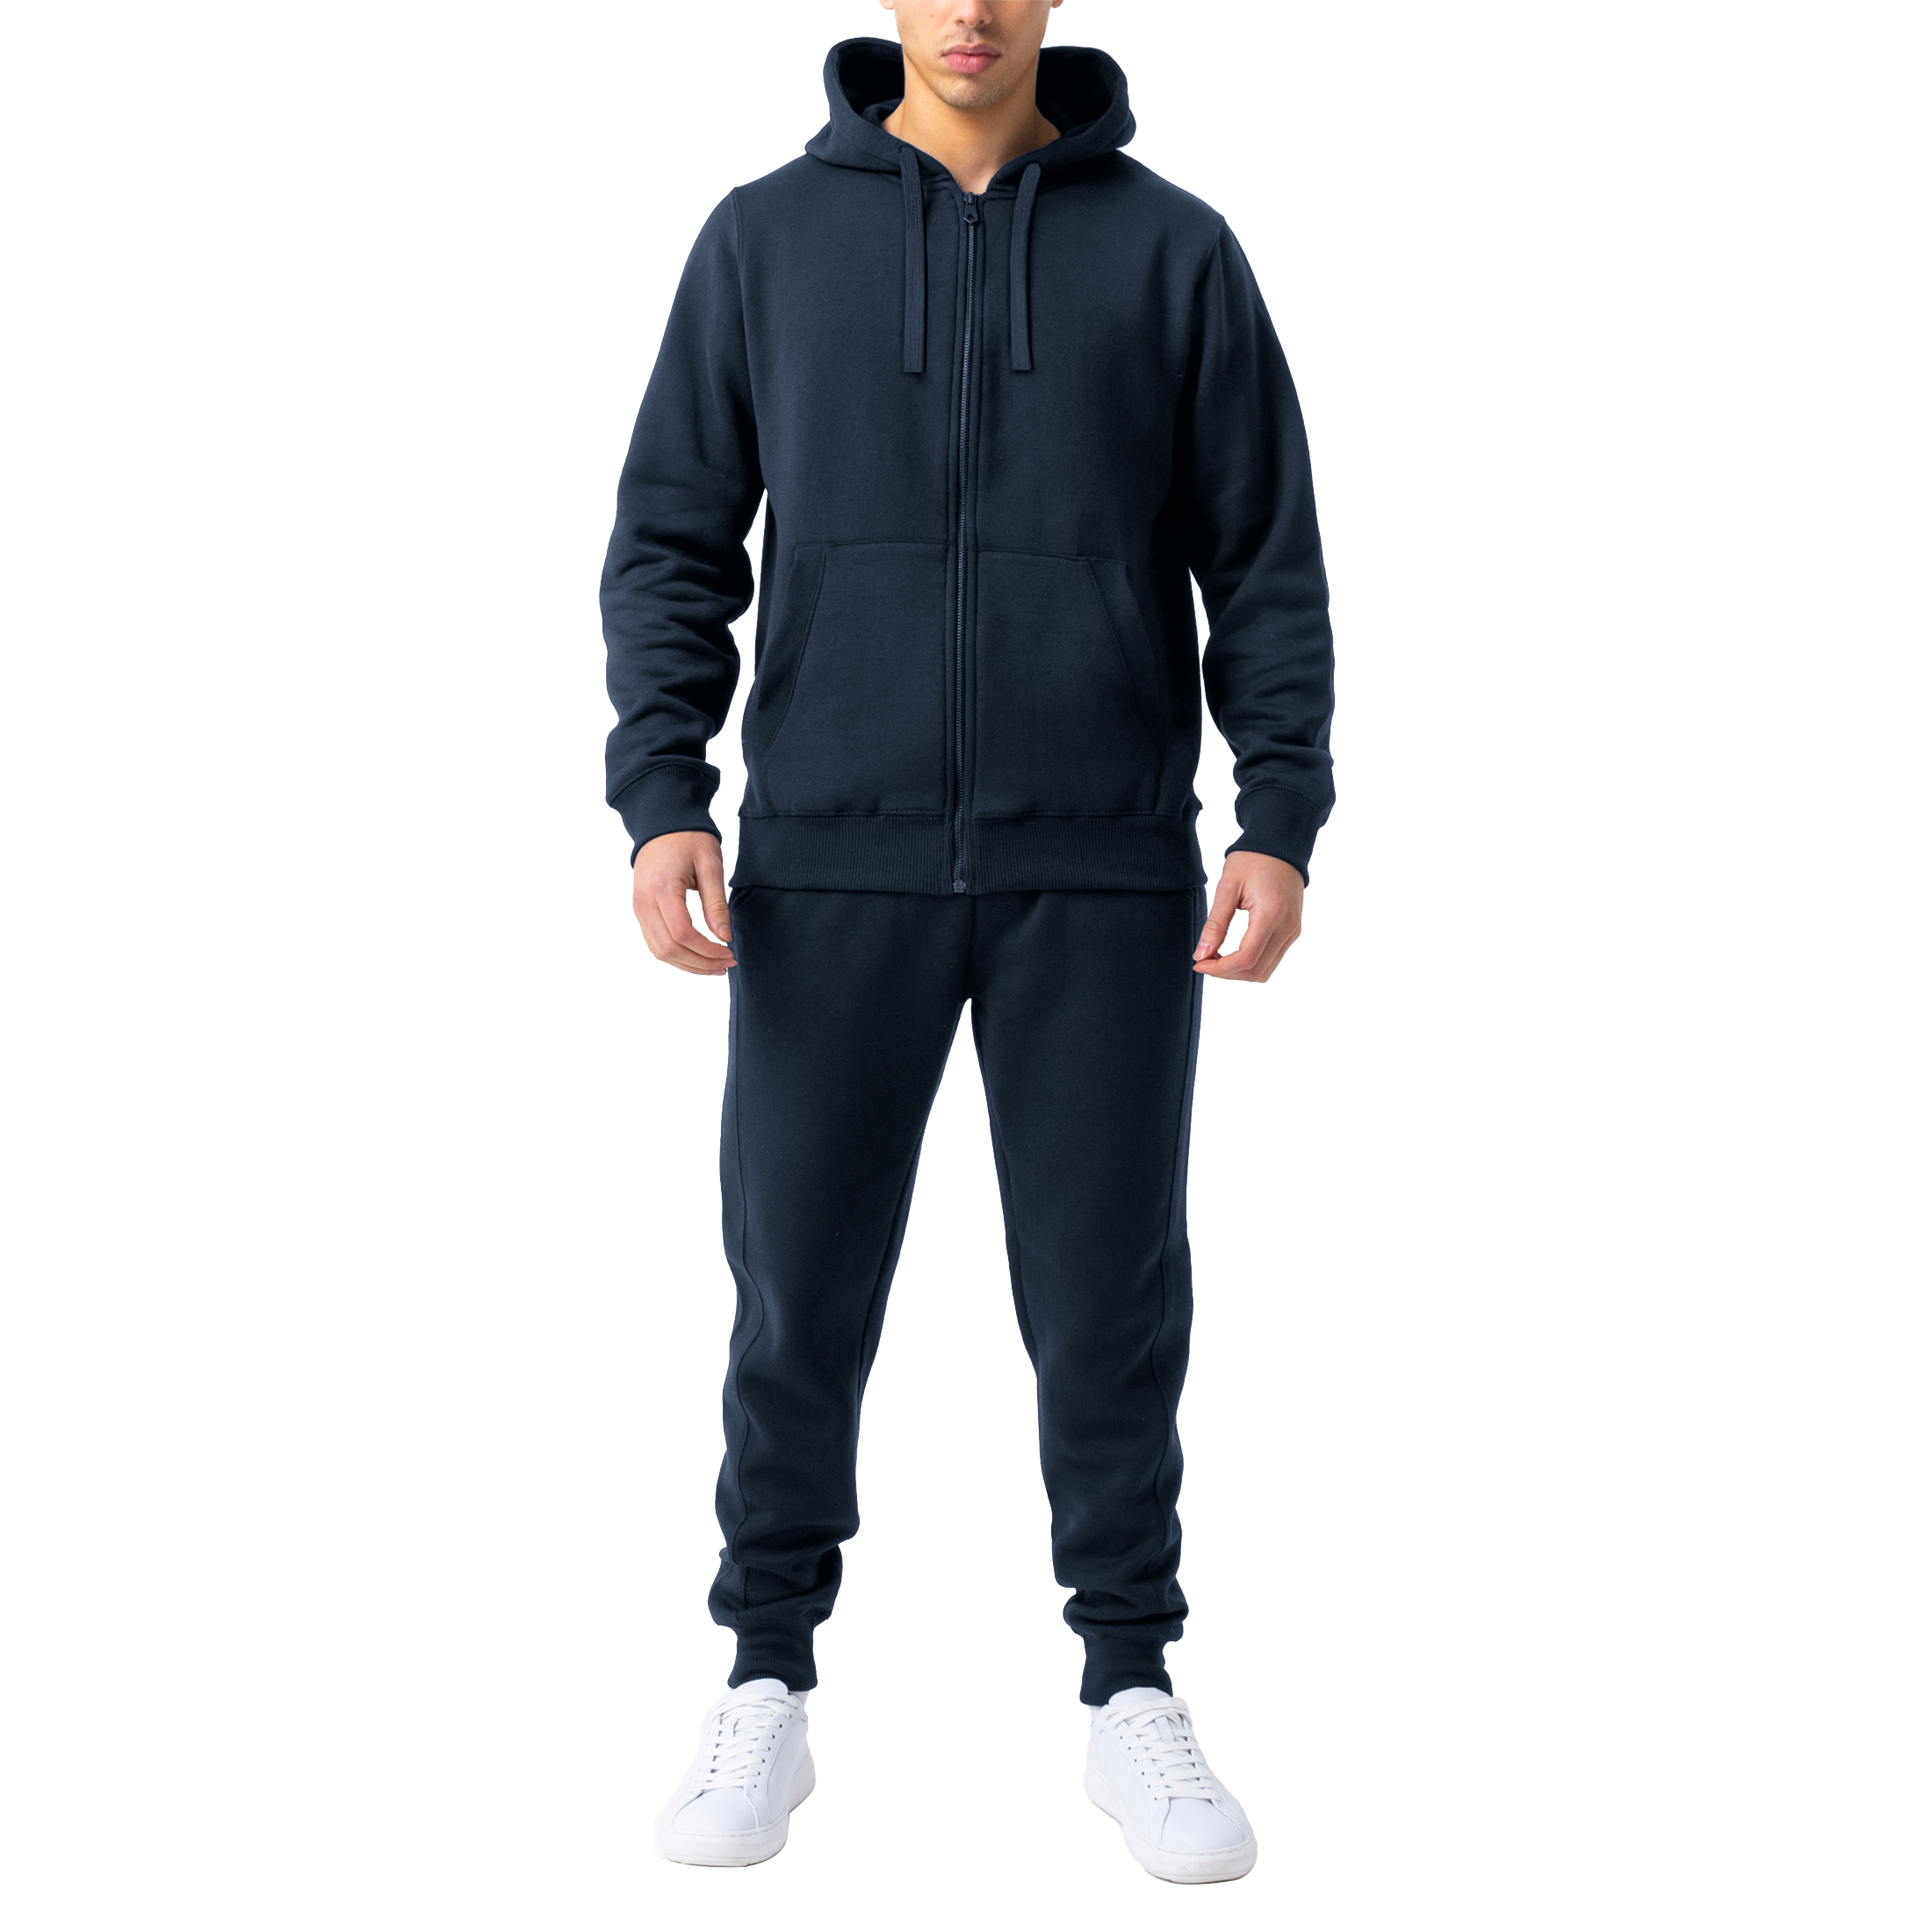 Men's Casual Jogging Athletic Active Full Zip Up Tracksuit - Navy, 3X-Large